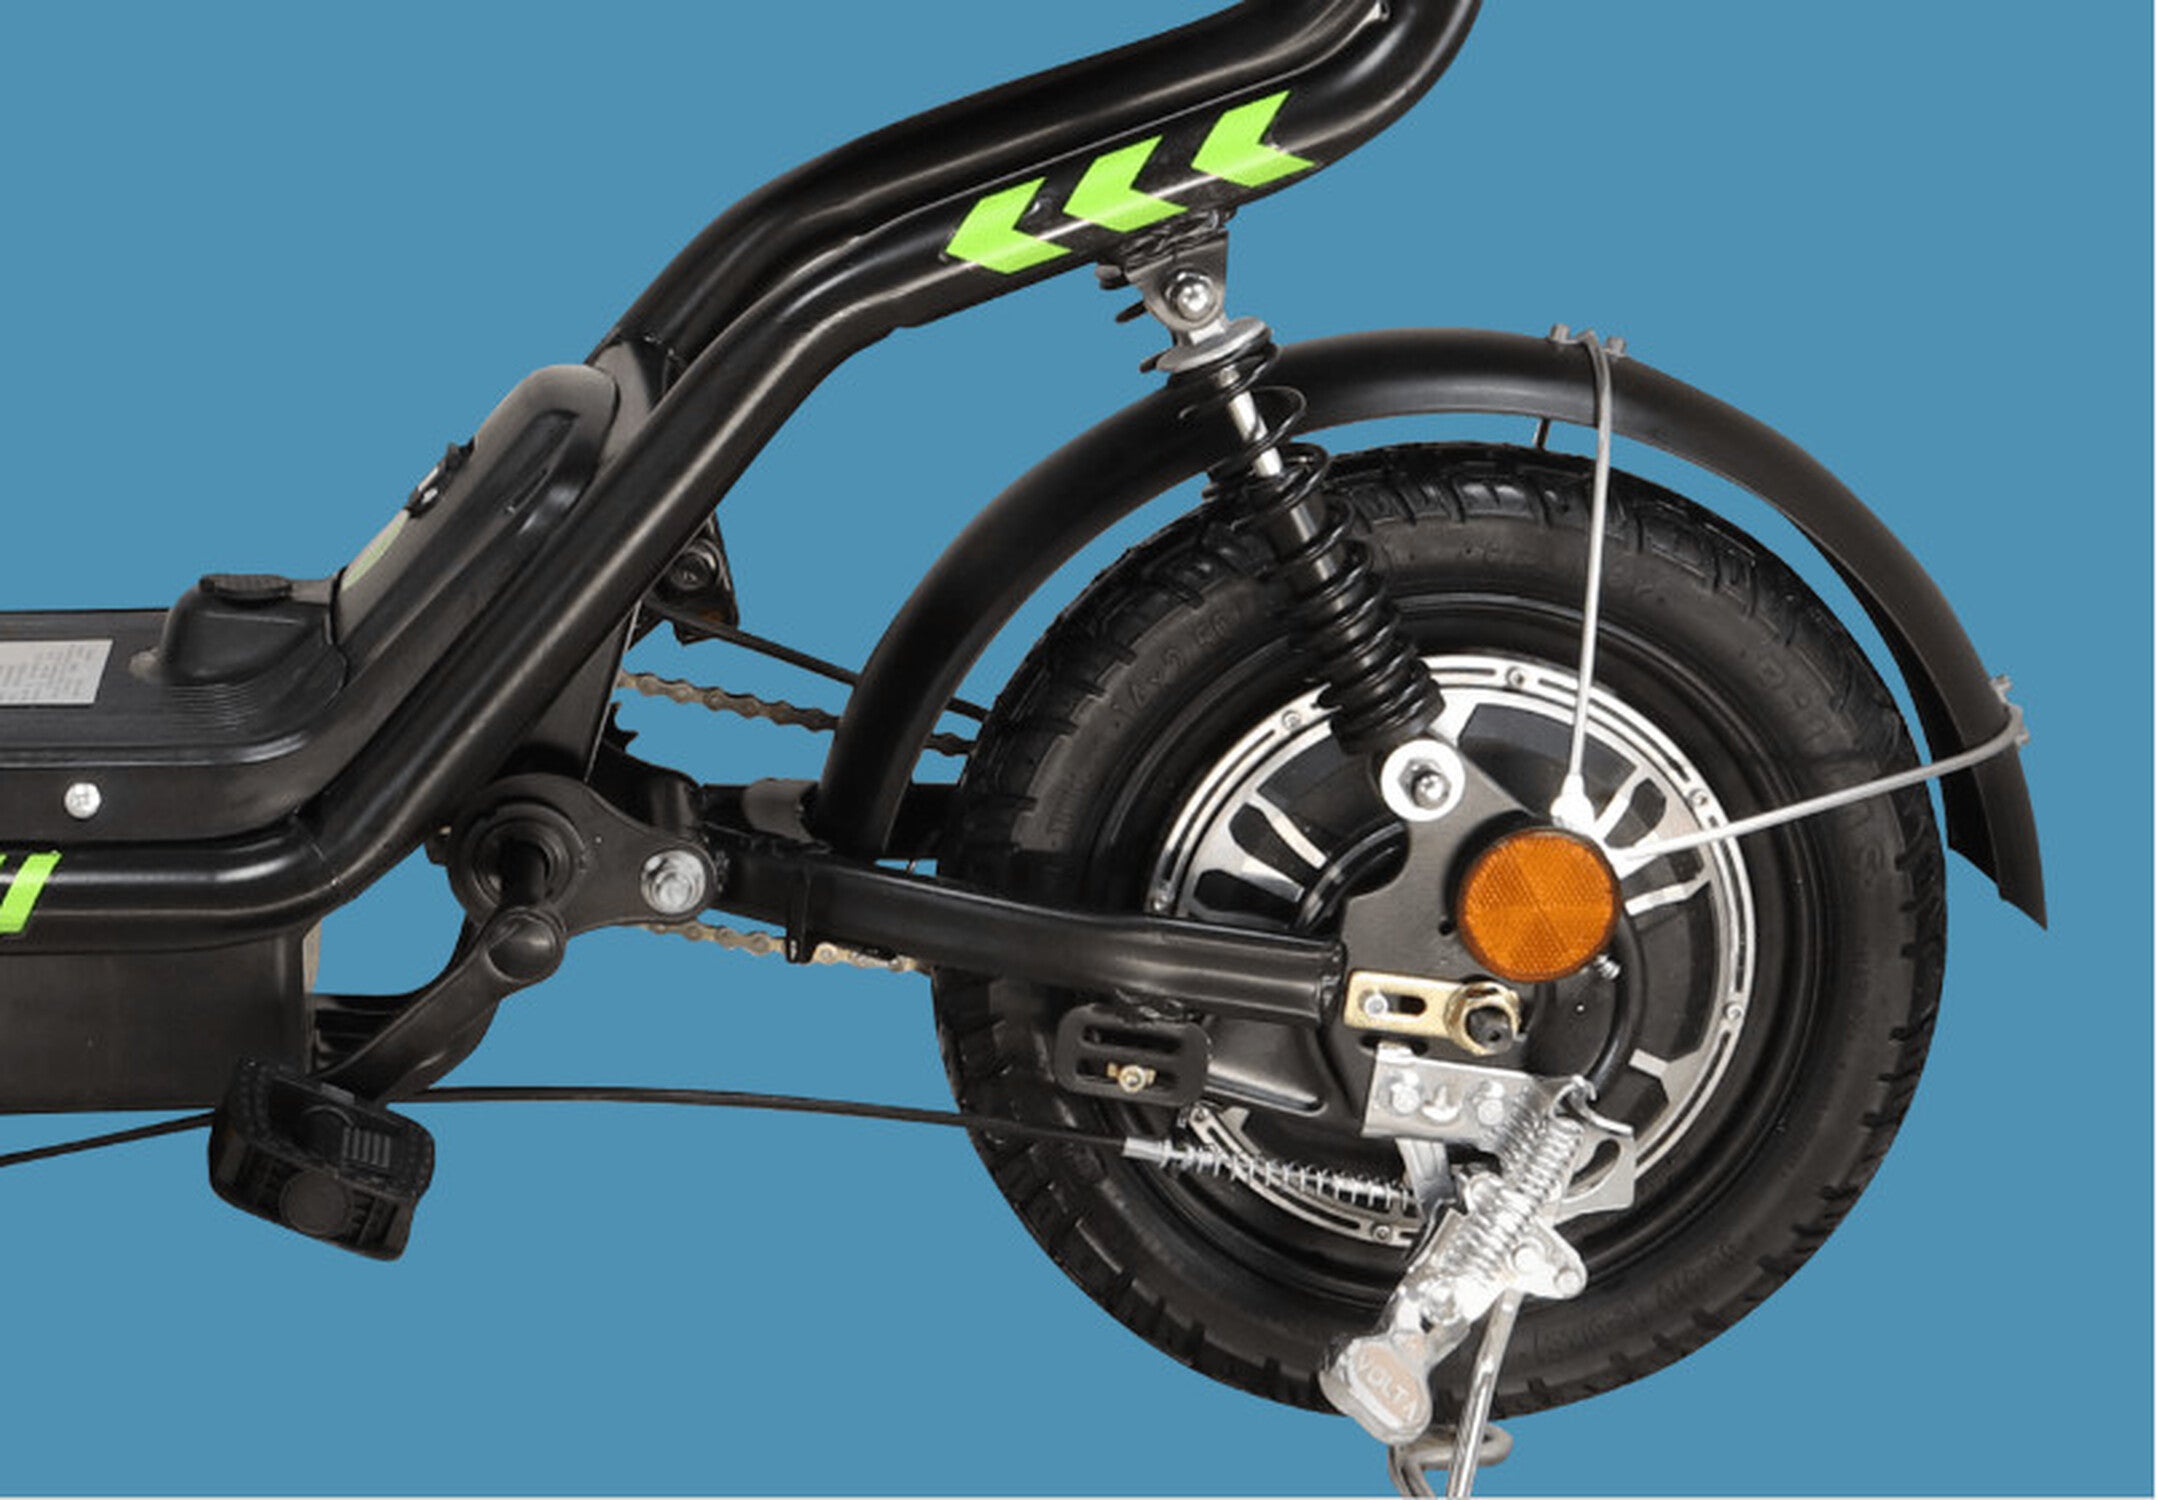 Rear Shock Absorber For Electric Vehicles at Rs 375/piece, bike shock  absorber in New Delhi